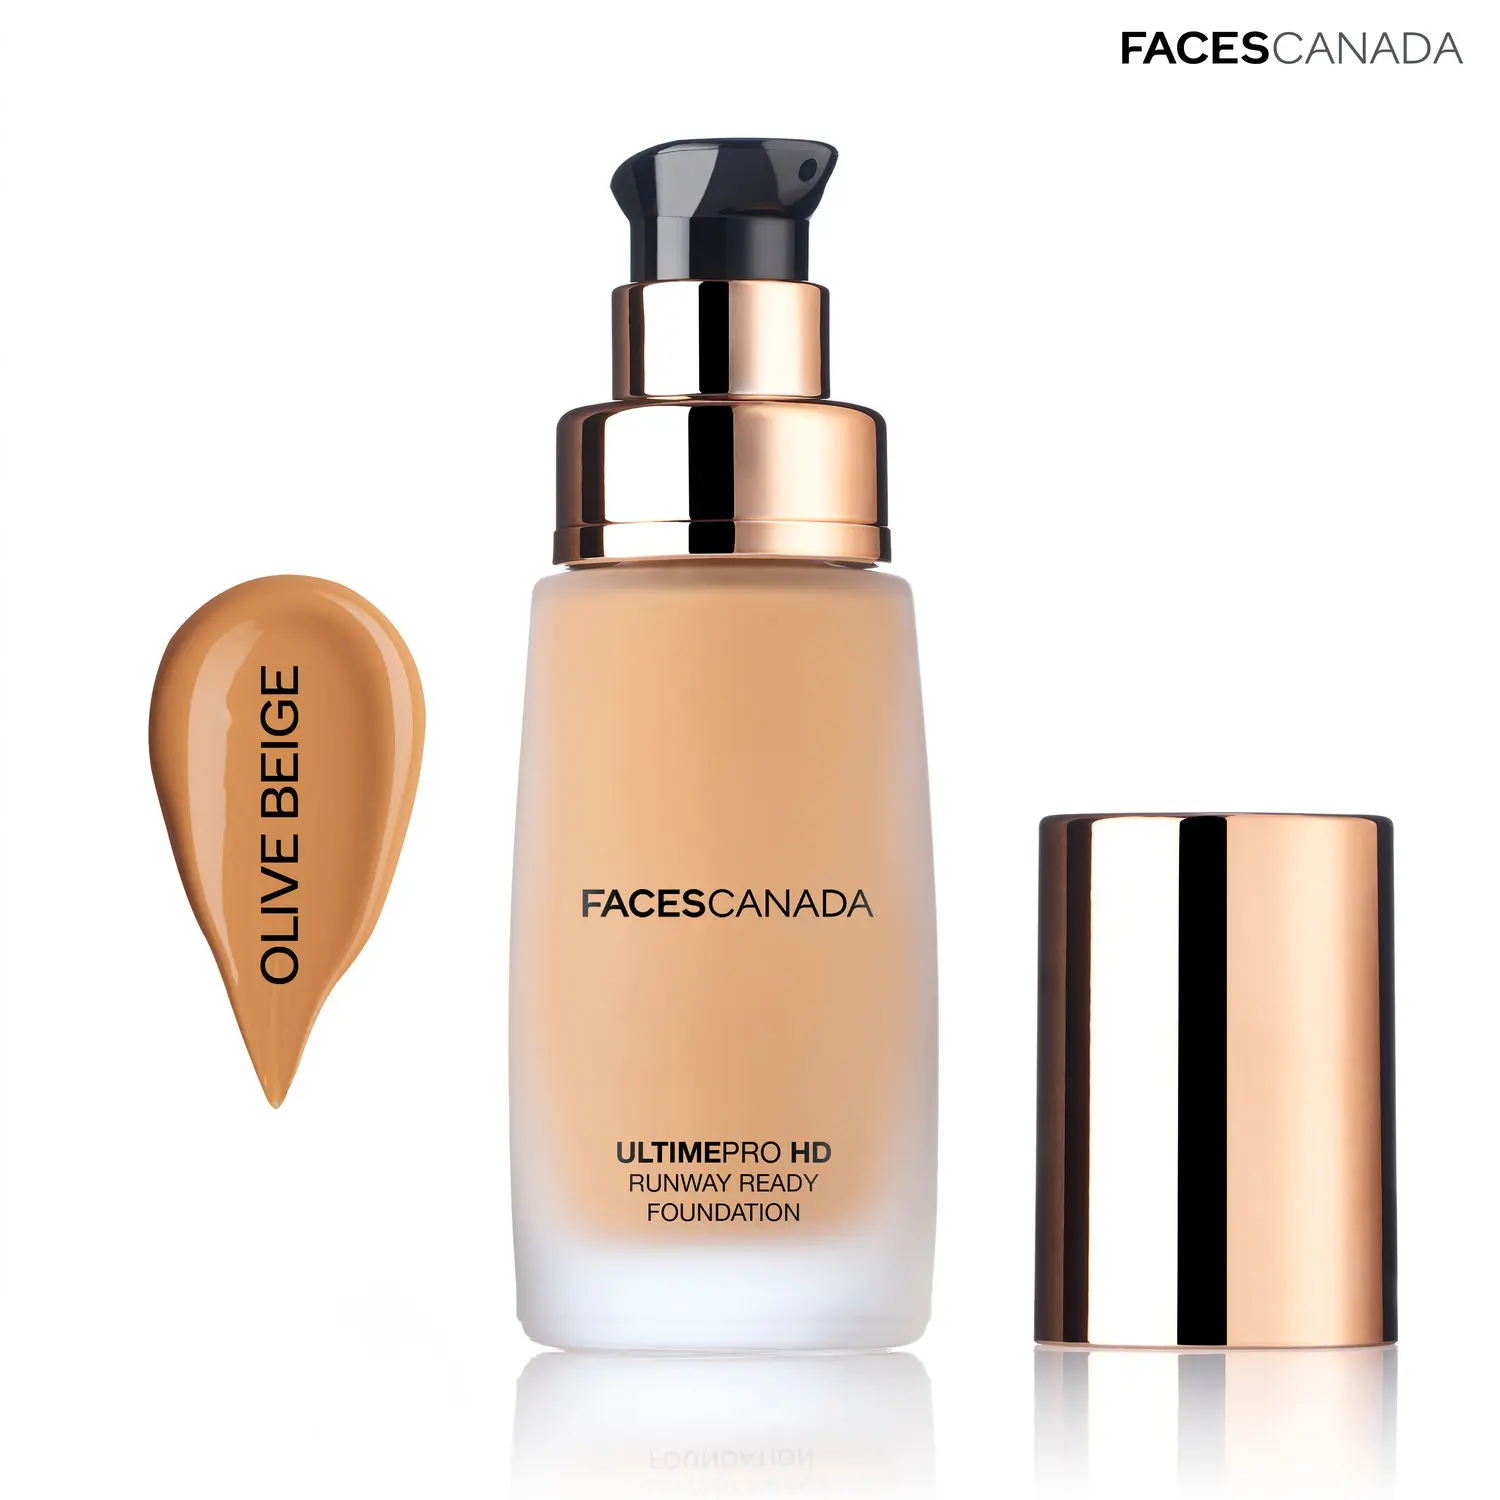 Faces Canada Ultime Pro HD Runway Ready Foundation - Olive Beige 05 (30 ml)